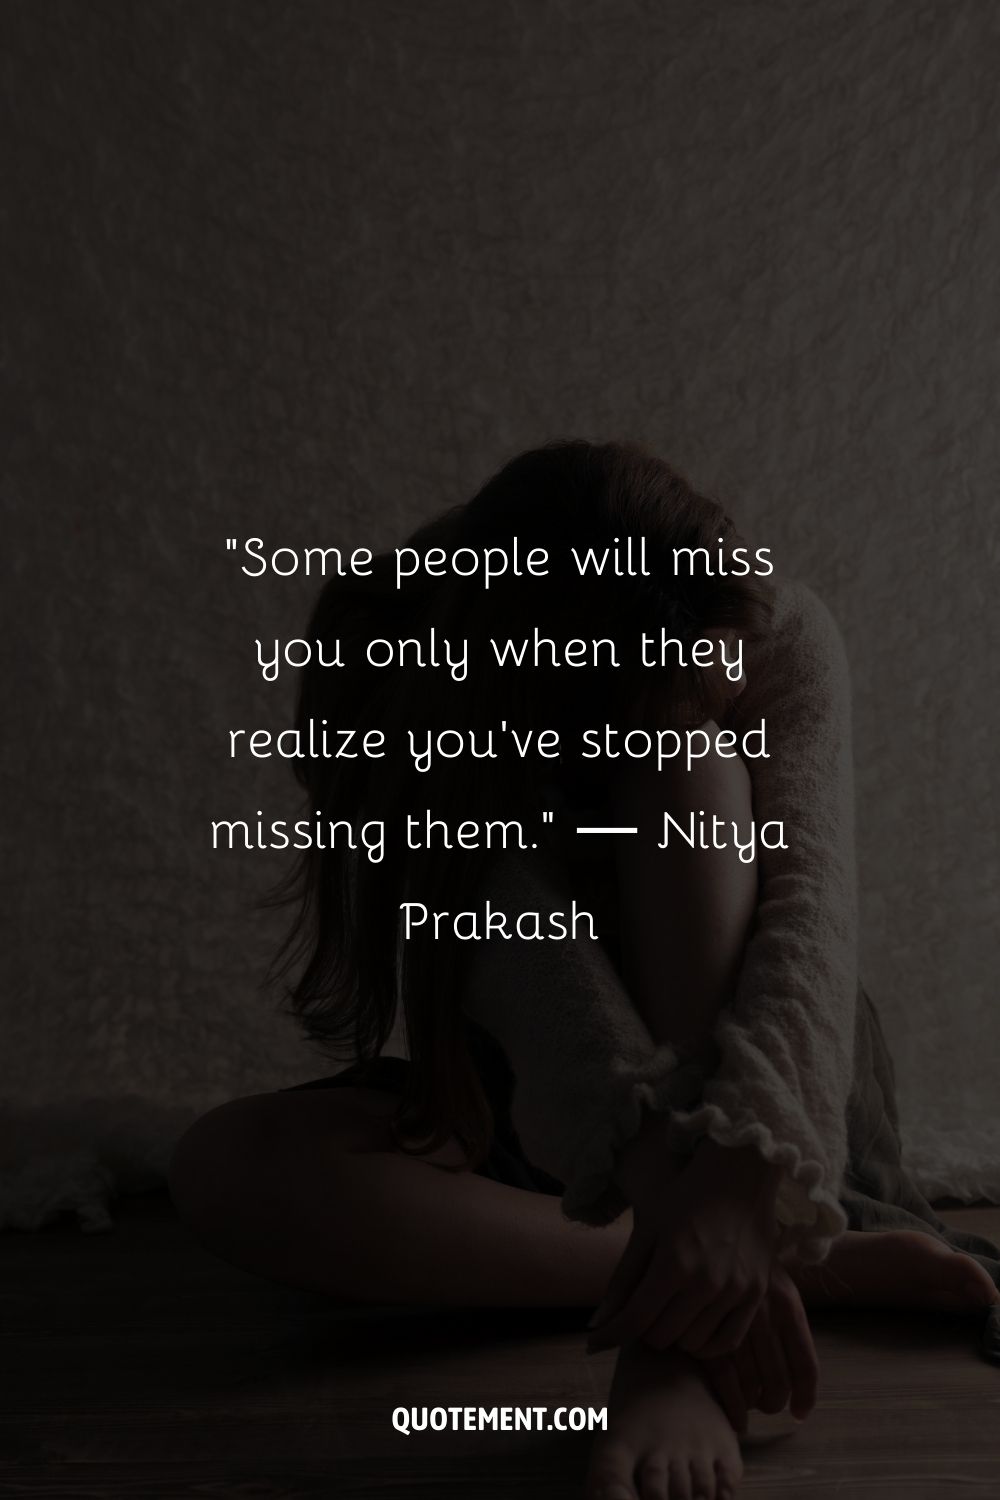 Some people will miss you only when they realize you've stopped missing them